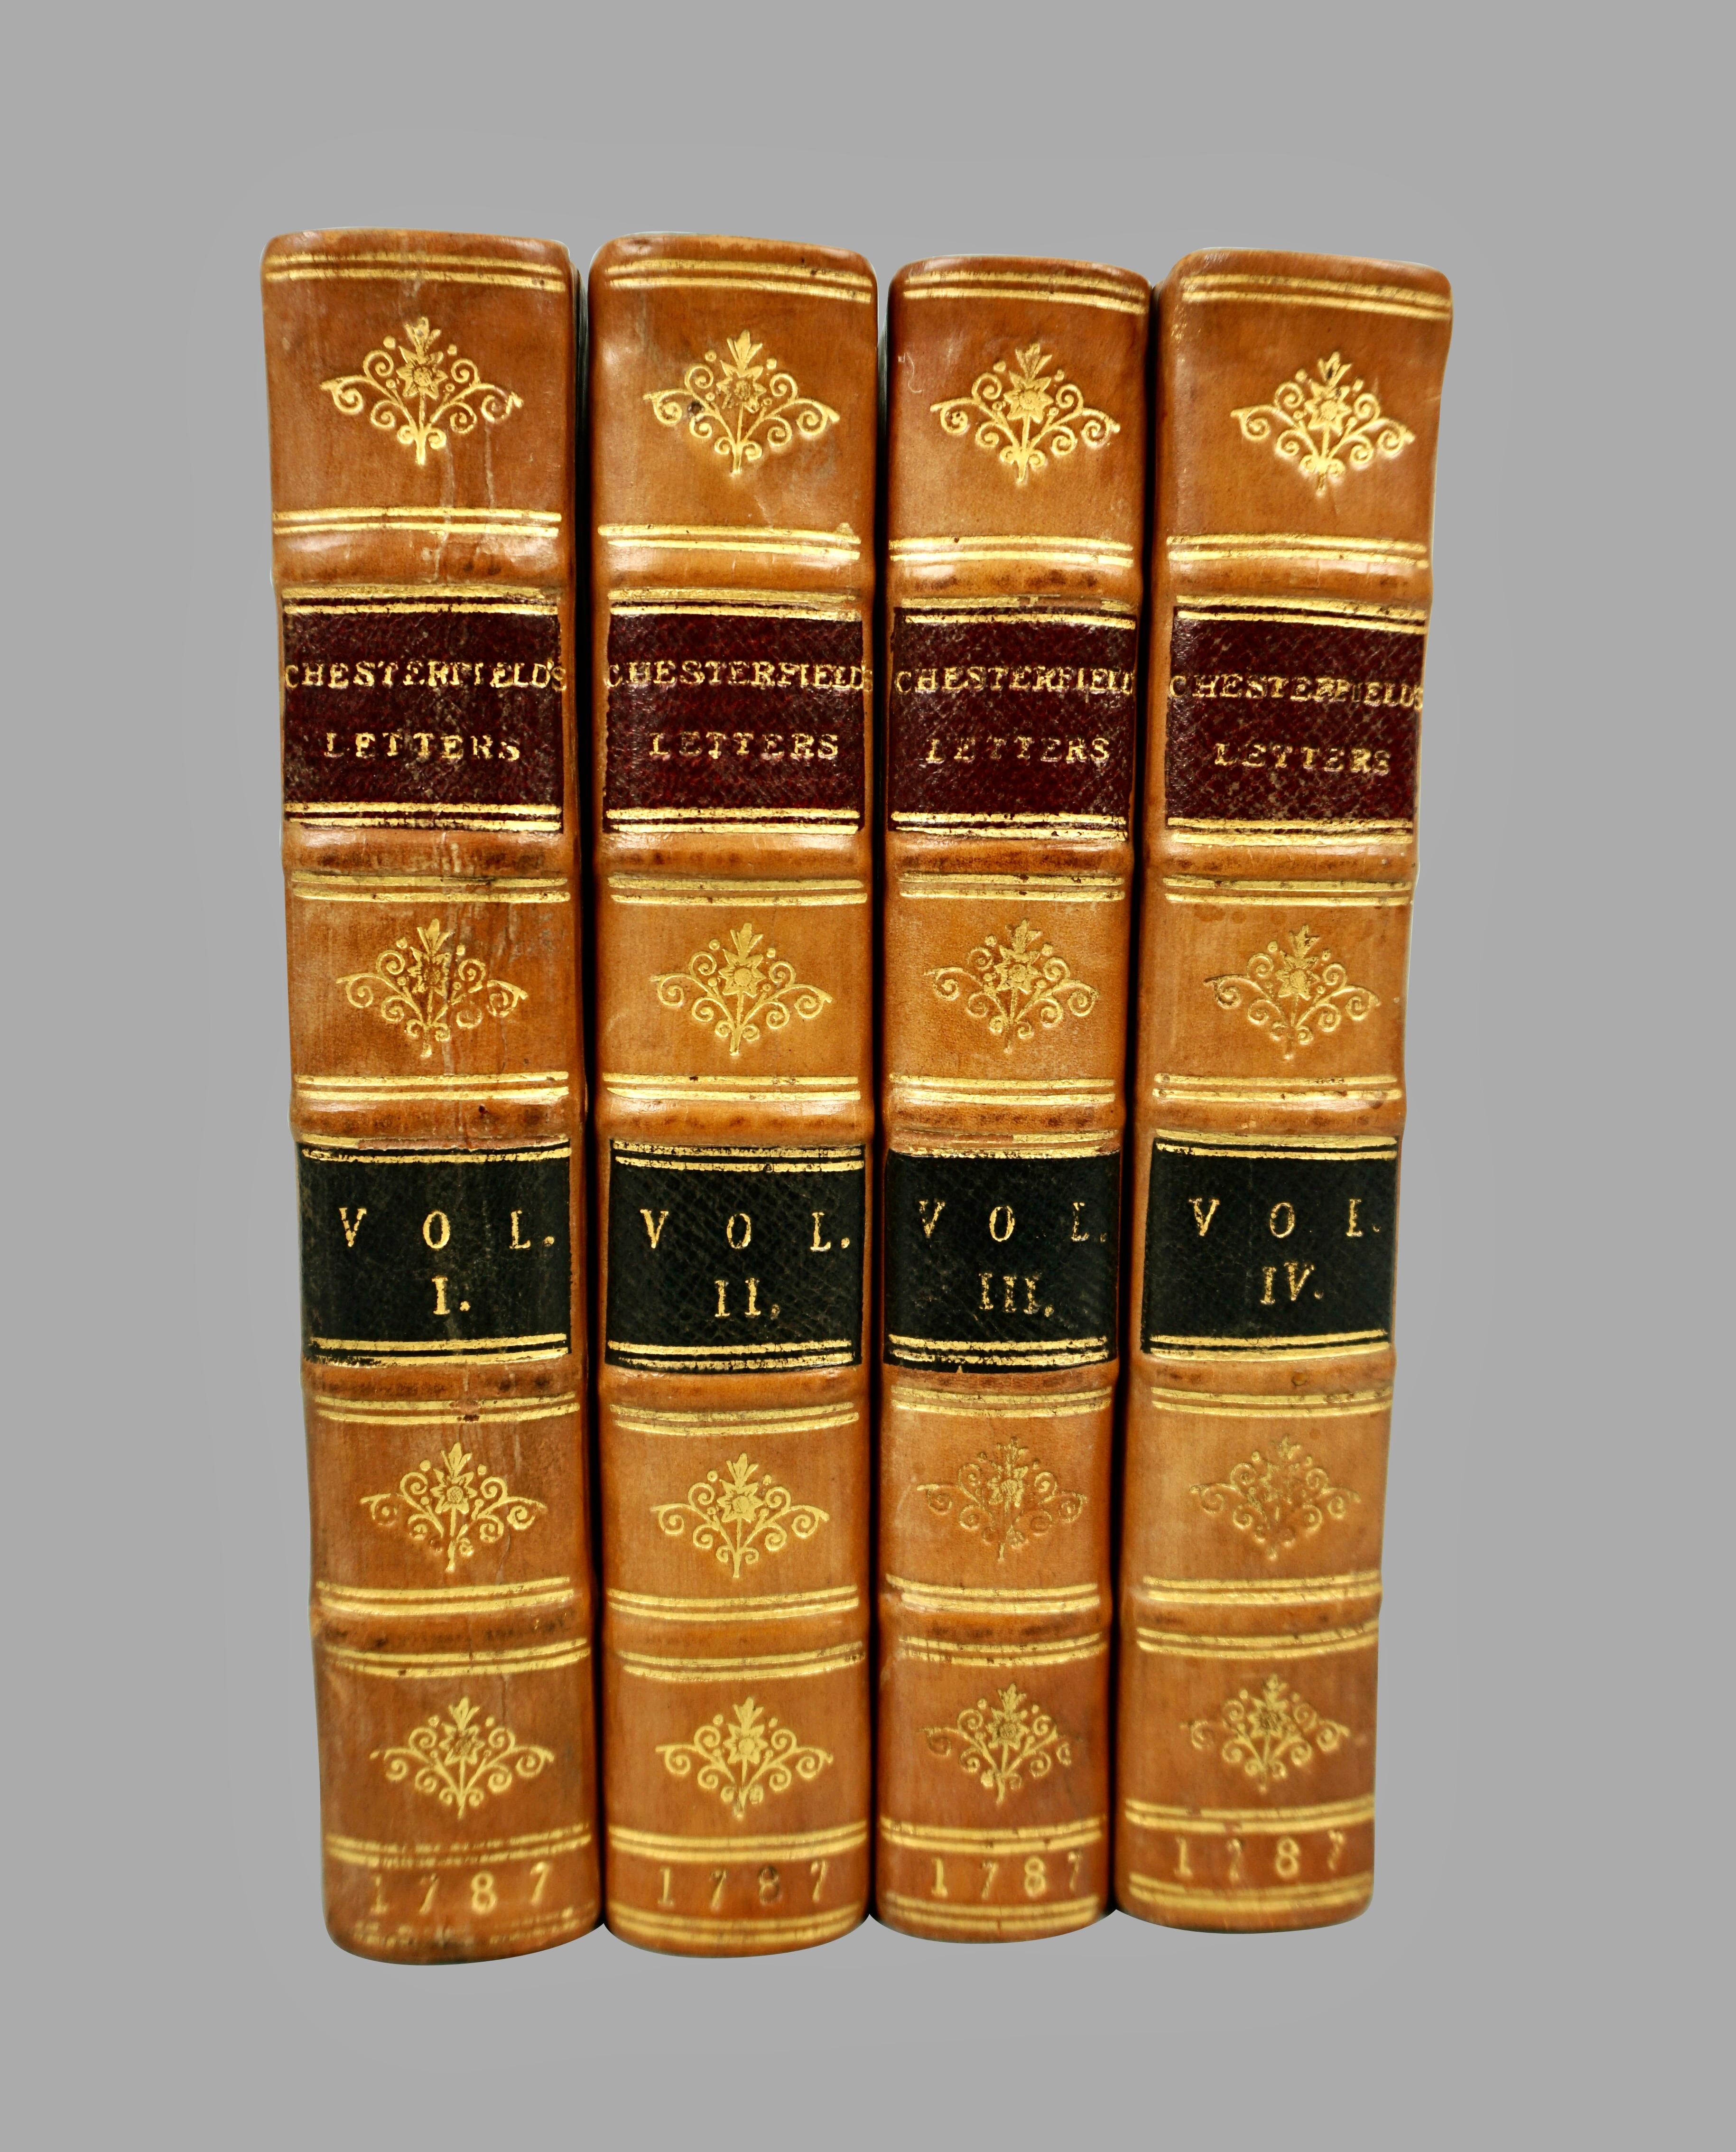 Earl of Chesterfield's letters to his son and luminaries of the day in 4 volumes in their original full leather bindings, published London J. Dodsley 1787. The spines have raised bands and gilt lettering. Chesterfield, whose given name was Philip